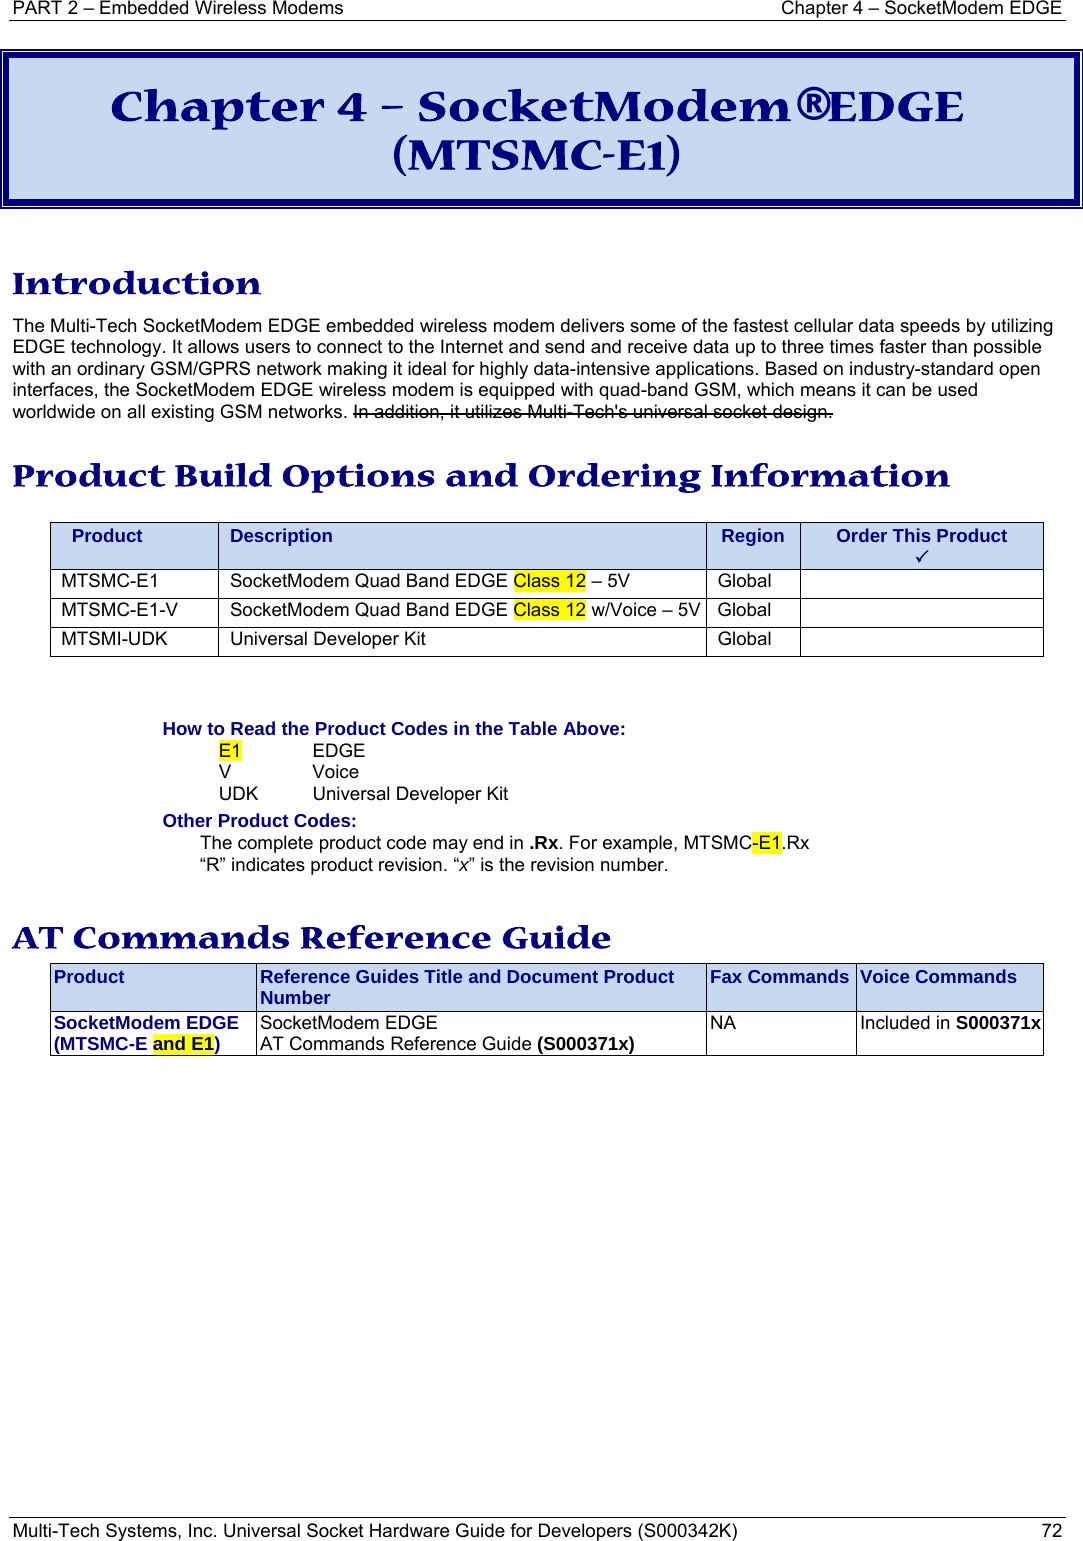 PART 2 – Embedded Wireless Modems  Chapter 4 – SocketModem EDGE Multi-Tech Systems, Inc. Universal Socket Hardware Guide for Developers (S000342K)  72  Chapter 4 – SocketModem® EDGE (MTSMC-E1)  Introduction The Multi-Tech SocketModem EDGE embedded wireless modem delivers some of the fastest cellular data speeds by utilizing EDGE technology. It allows users to connect to the Internet and send and receive data up to three times faster than possible with an ordinary GSM/GPRS network making it ideal for highly data-intensive applications. Based on industry-standard open interfaces, the SocketModem EDGE wireless modem is equipped with quad-band GSM, which means it can be used worldwide on all existing GSM networks. In addition, it utilizes Multi-Tech&apos;s universal socket design. Product Build Options and Ordering Information    Product  Description  Region  Order This Product 3MTSMC-E1  SocketModem Quad Band EDGE Class 12 – 5V  Global   MTSMC-E1-V  SocketModem Quad Band EDGE Class 12 w/Voice – 5V Global   MTSMI-UDK  Universal Developer Kit  Global     How to Read the Product Codes in the Table Above: E1 EDGE V Voice  UDK  Universal Developer Kit Other Product Codes: The complete product code may end in .Rx. For example, MTSMC-E1.Rx   “R” indicates product revision. “x” is the revision number.  AT Commands Reference Guide Product  Reference Guides Title and Document Product Number  Fax Commands  Voice Commands SocketModem EDGE (MTSMC-E and E1)  SocketModem EDGE  AT Commands Reference Guide (S000371x)  NA  Included in S000371x  